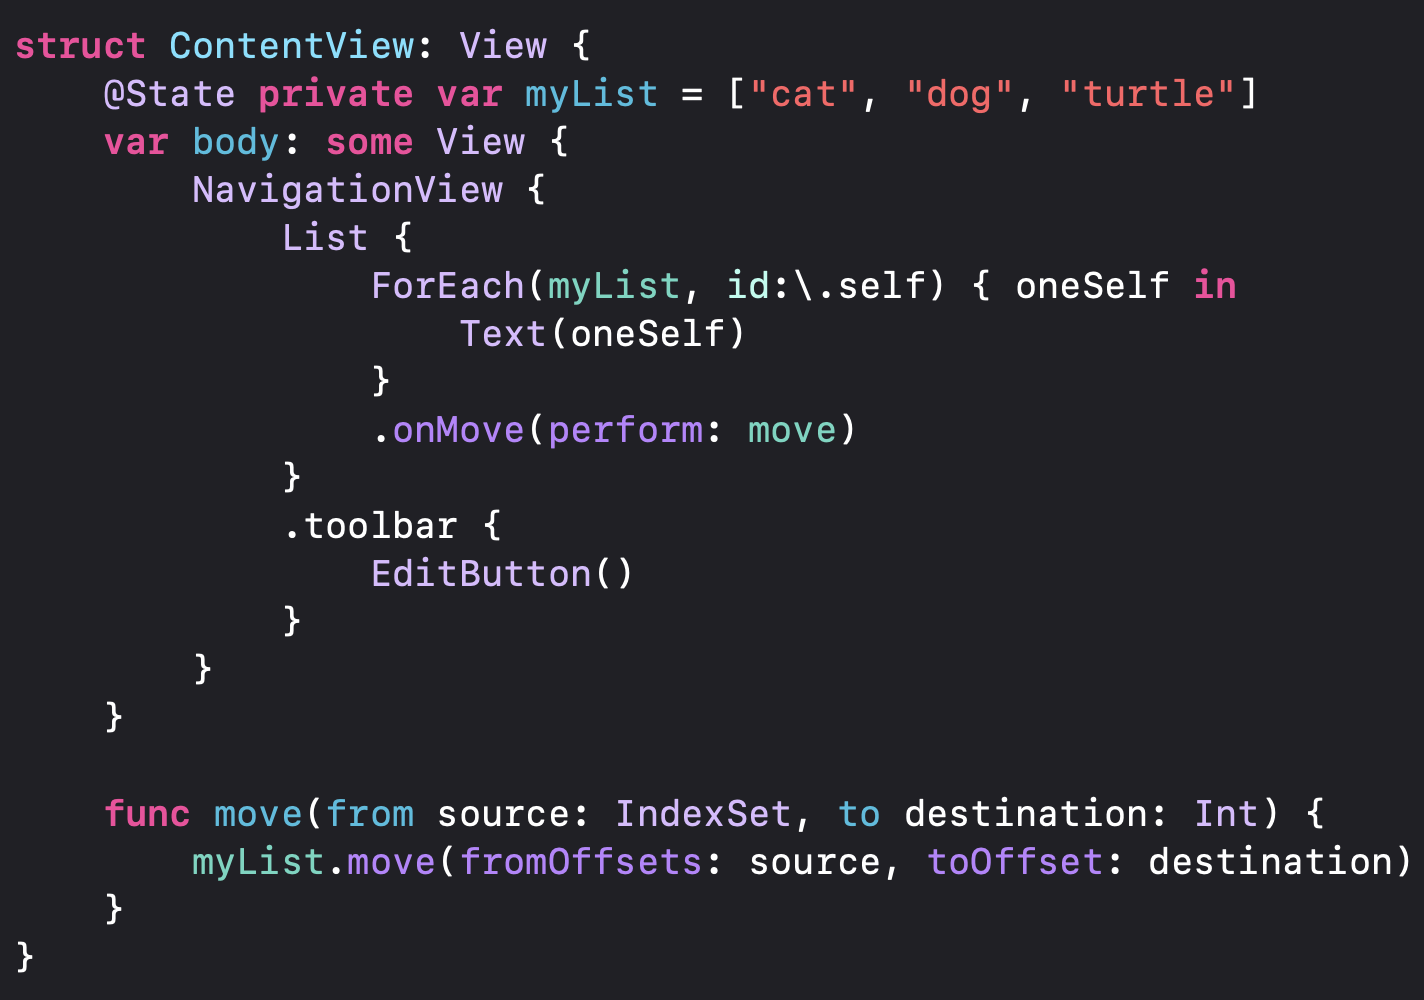 SwiftUI code for moving items in a simple List.